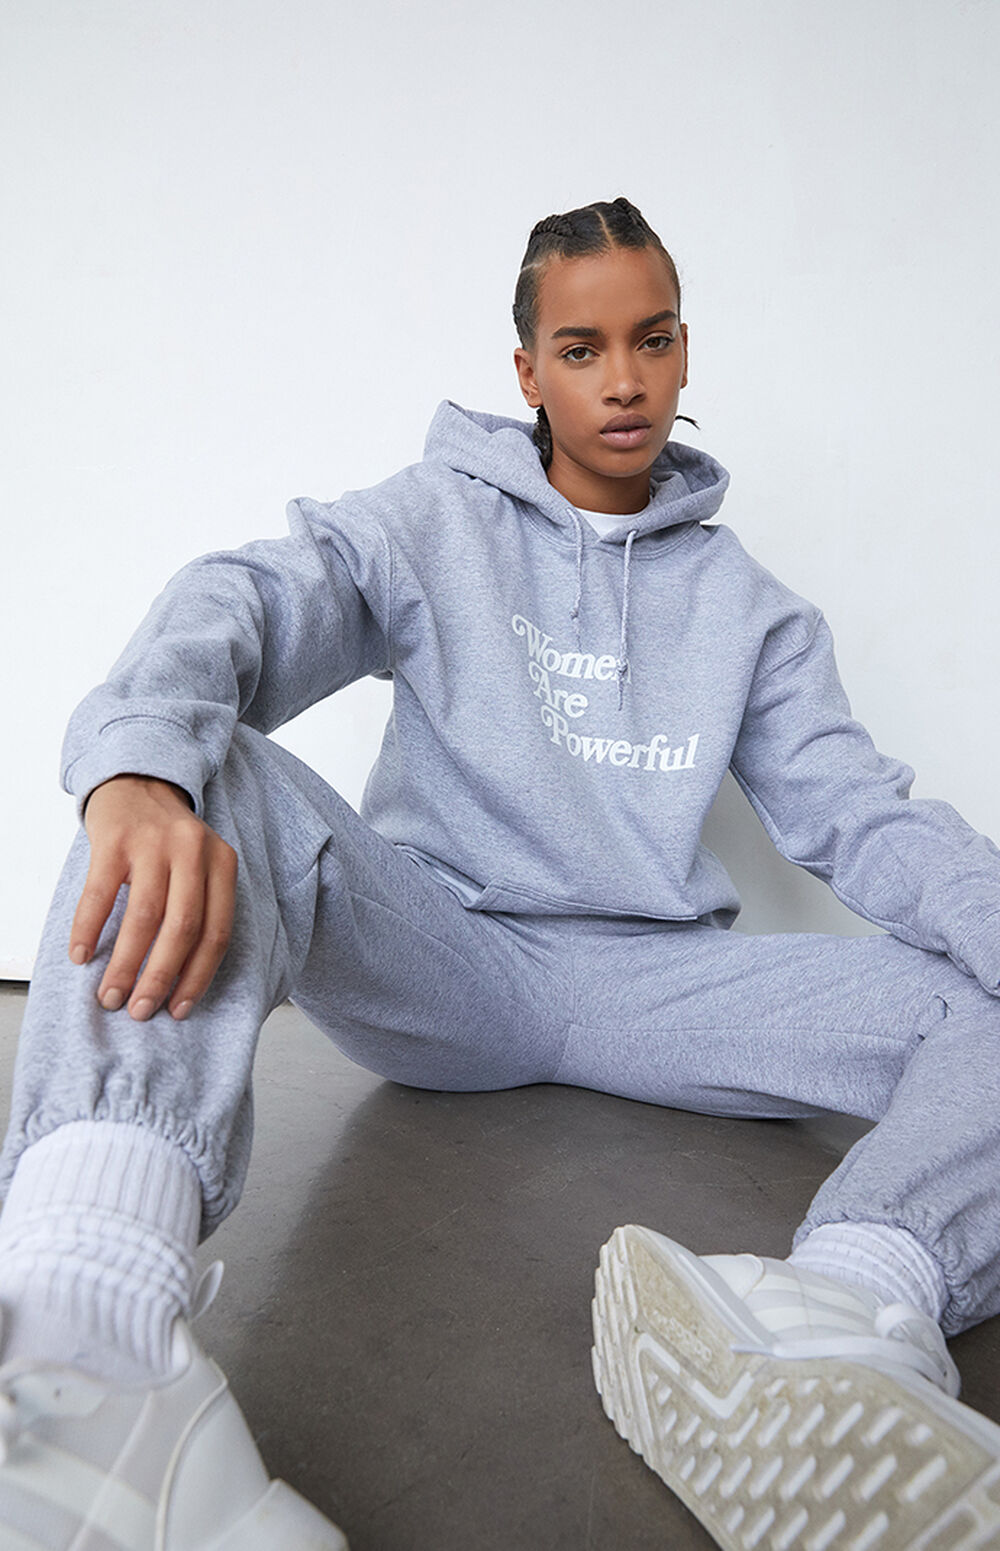 ONE DNA Women Are Powerful Hoodie | PacSun